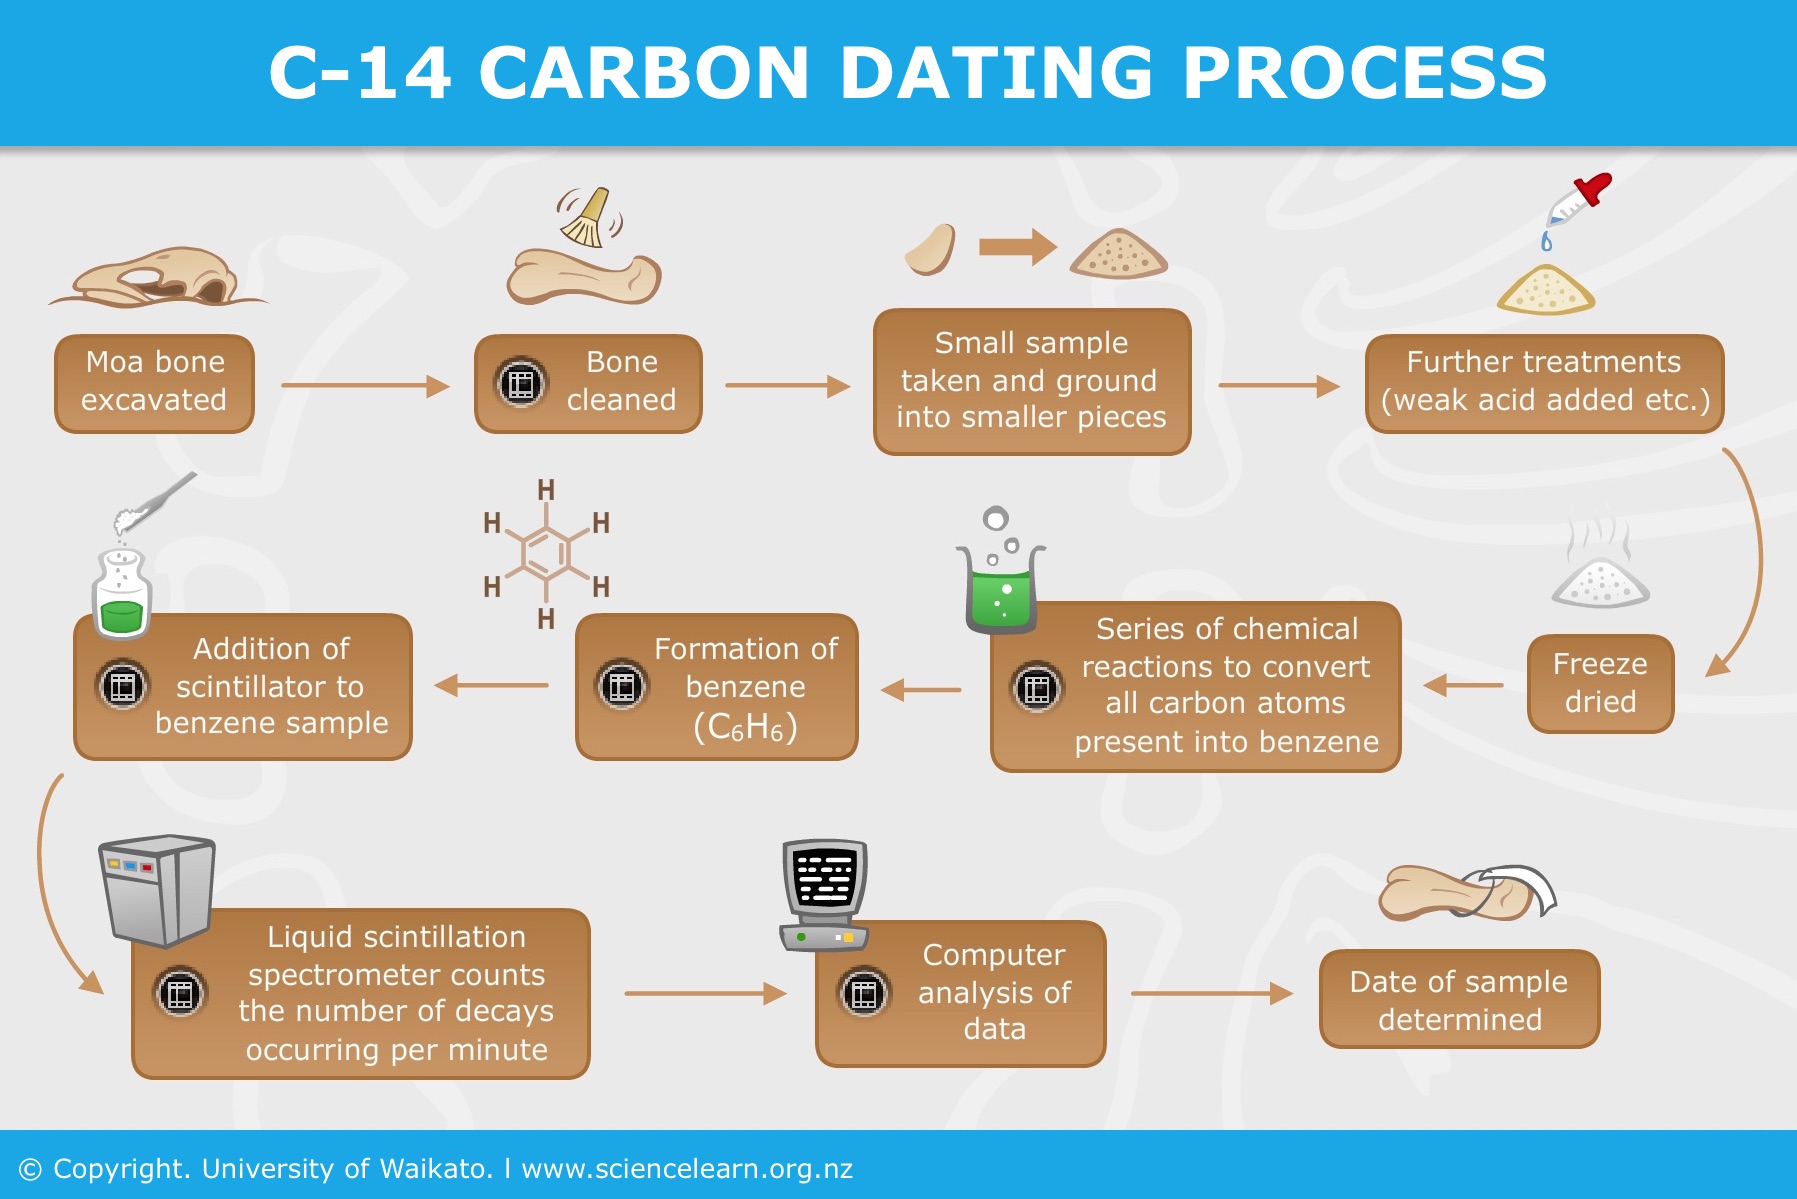 Who found carbon dating